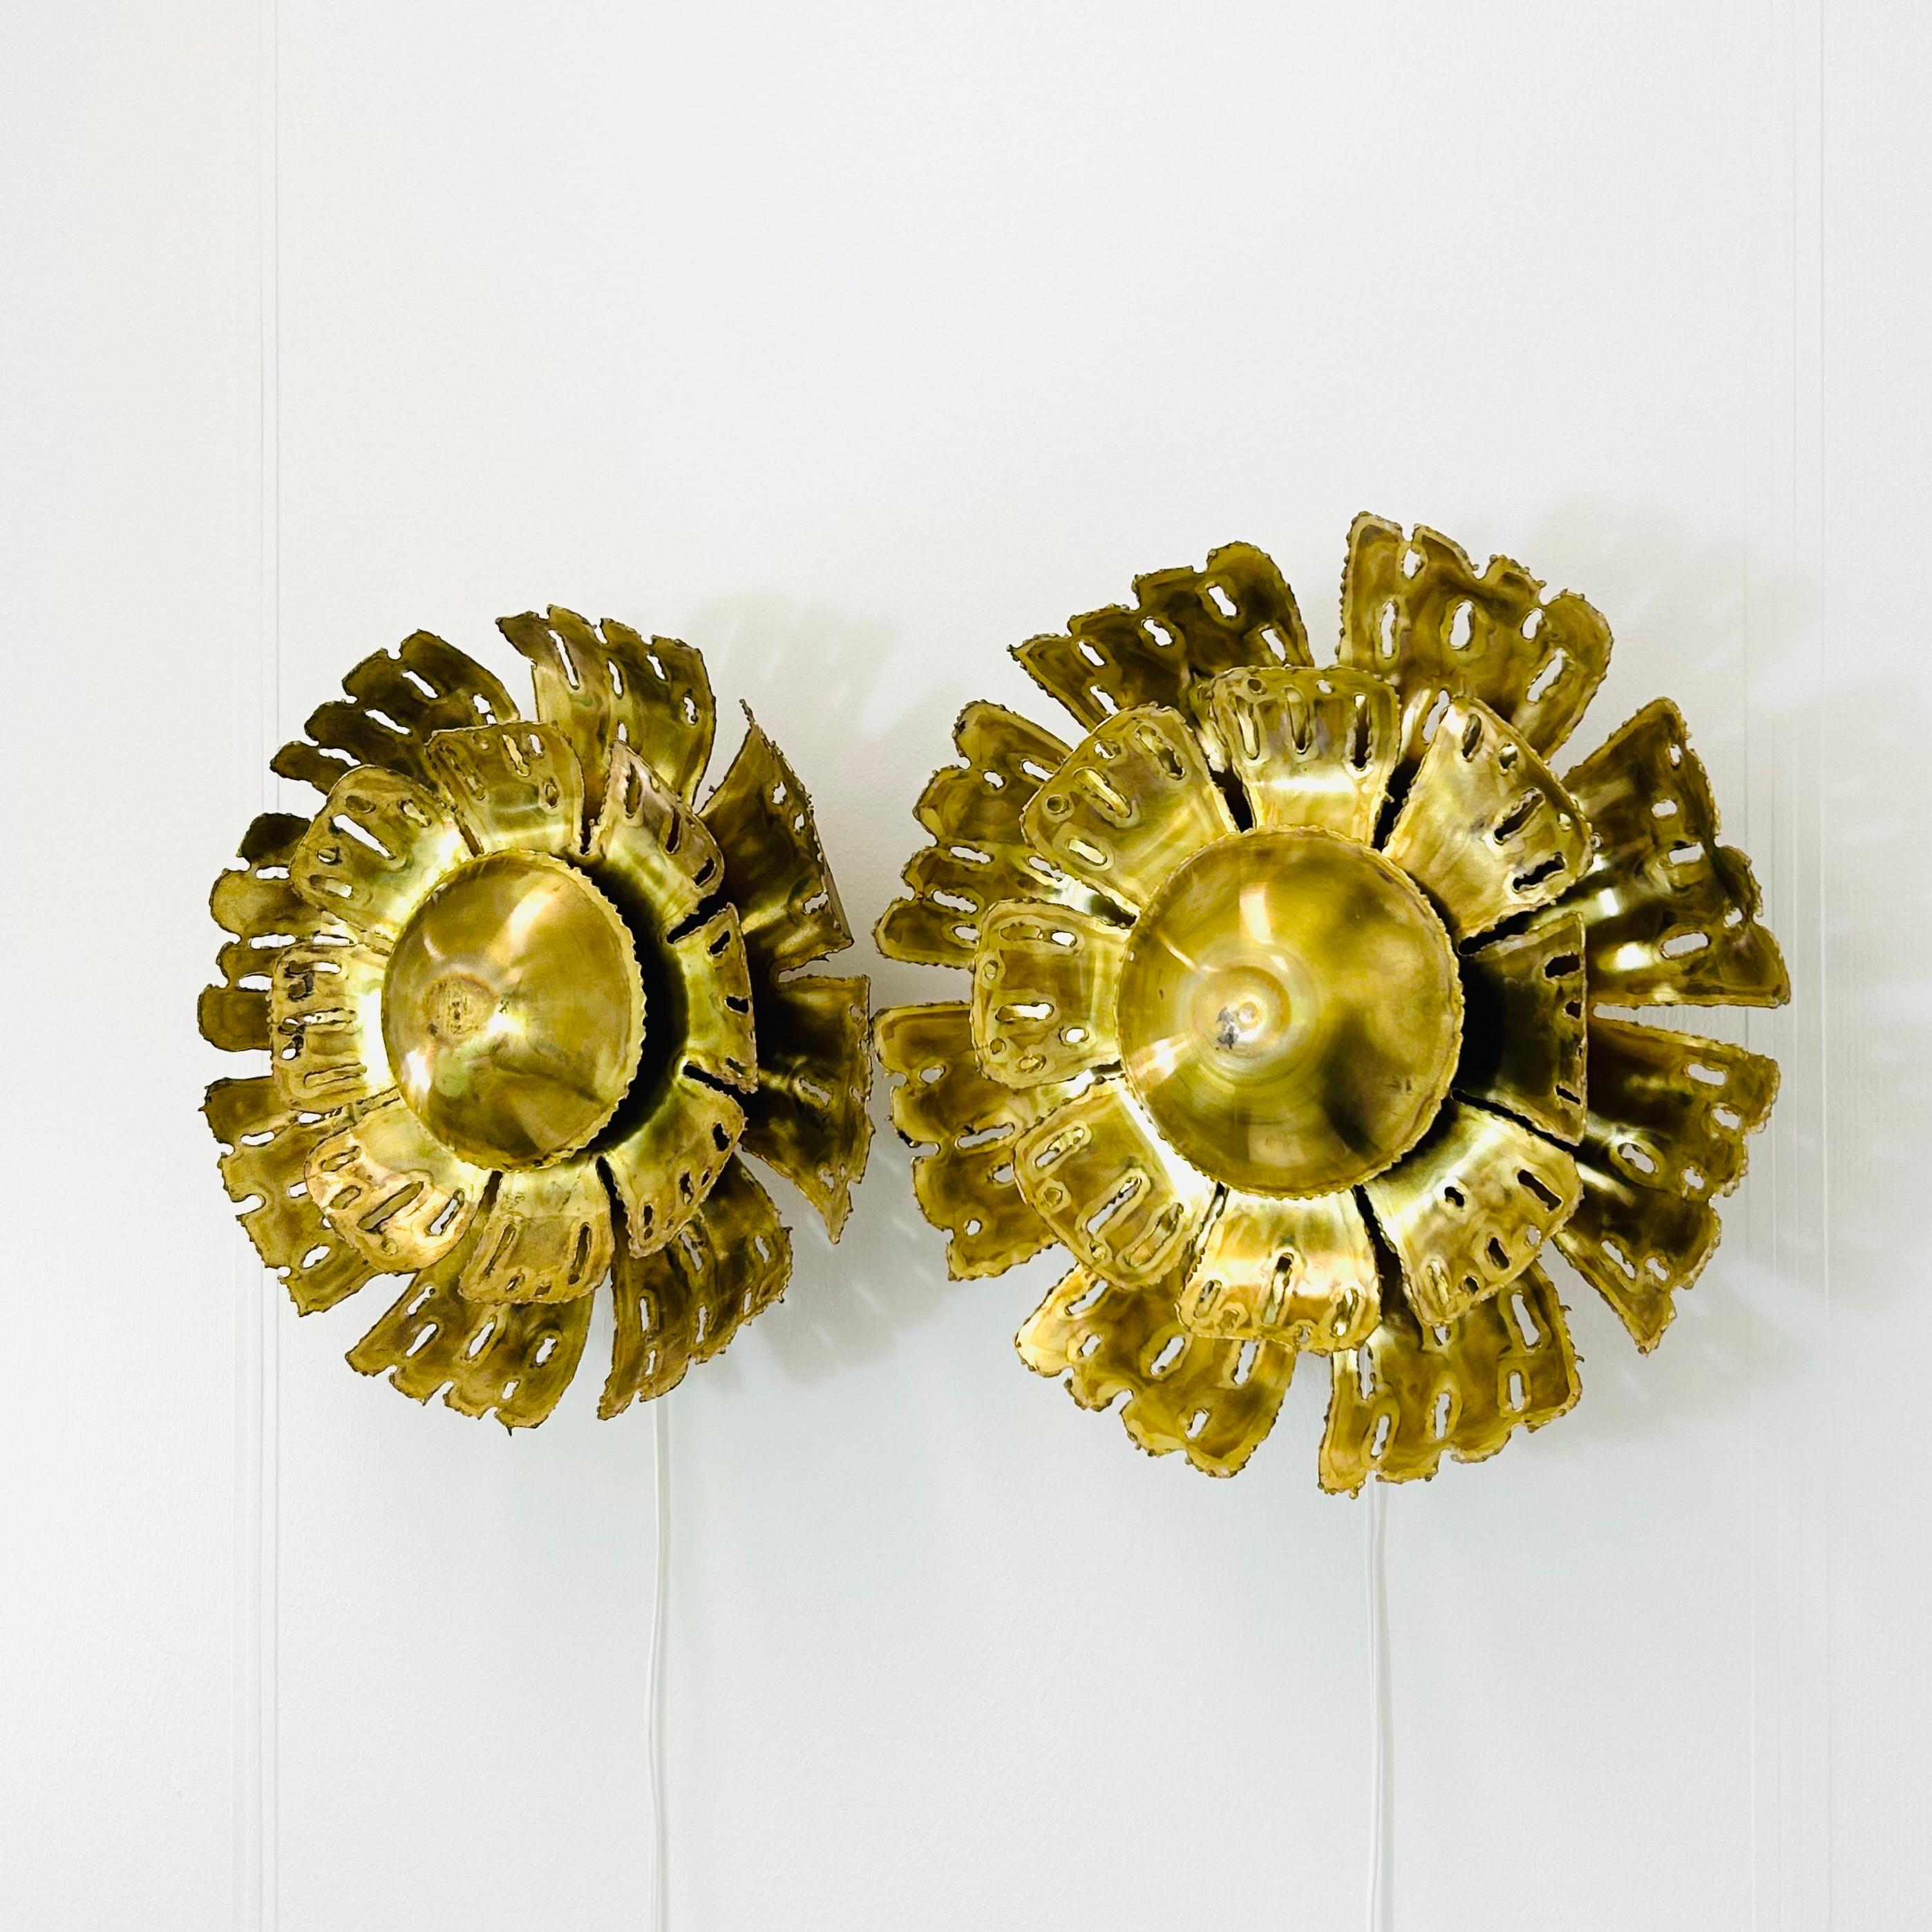 Pair of Large Brass Wall Lamps by Svend Aage Holm Sorensen, 1960s, Denmark 2